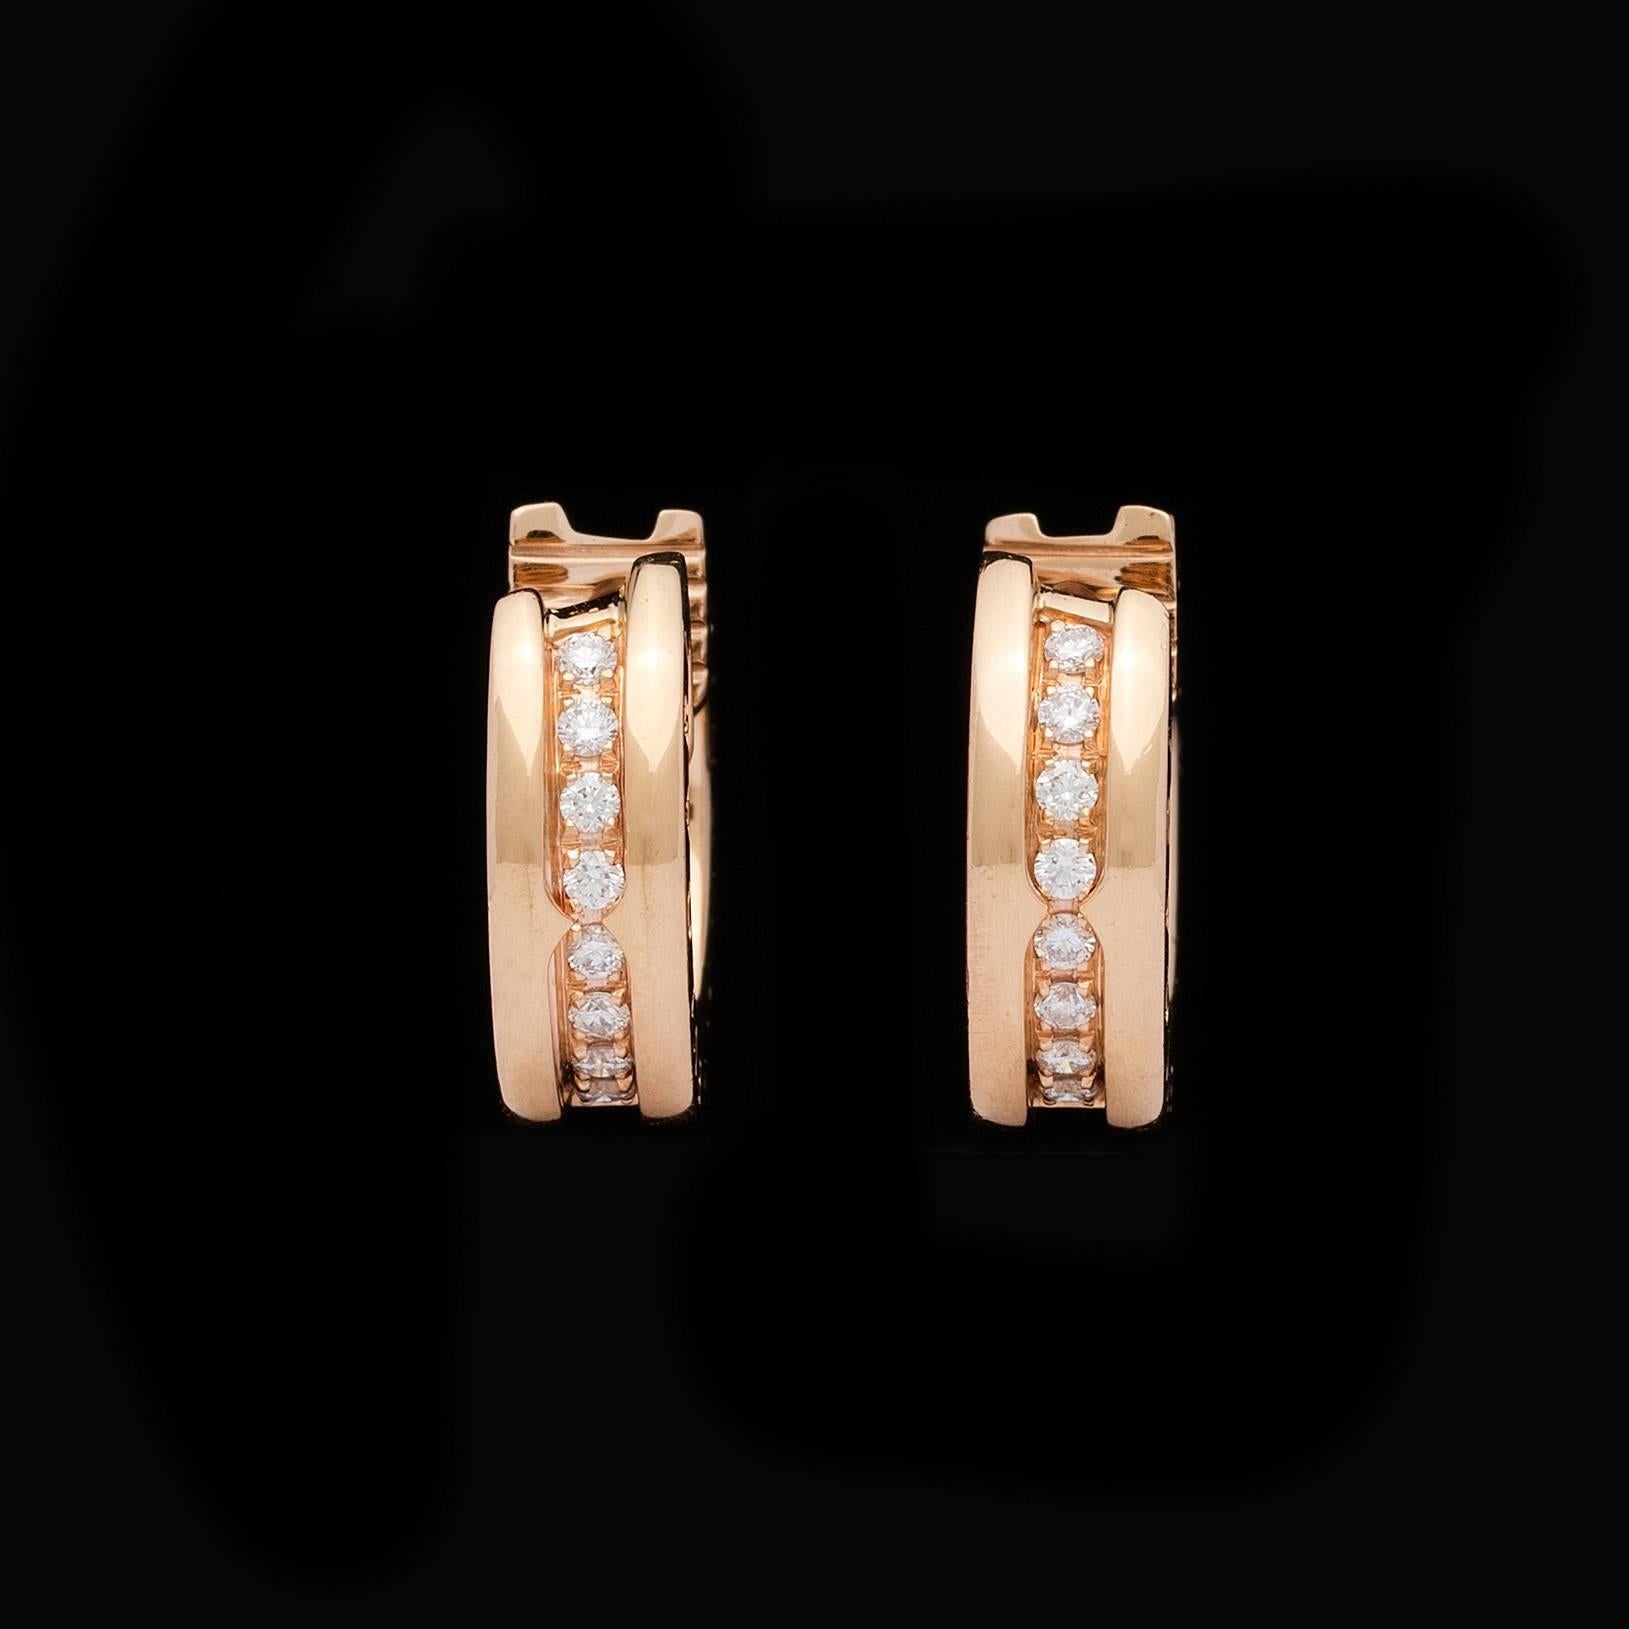 Iconic Bulgari B.Zero1 18Kt Pink Gold Diamond Pave Small Hoop Earrings Featuring 0.16 ctw Round Brilliant Cut Diamonds.  The earrings each have a 1/2 inch diameter and weigh a total of 8.2 grams for the pair.  Original Bulgari packaging is included.